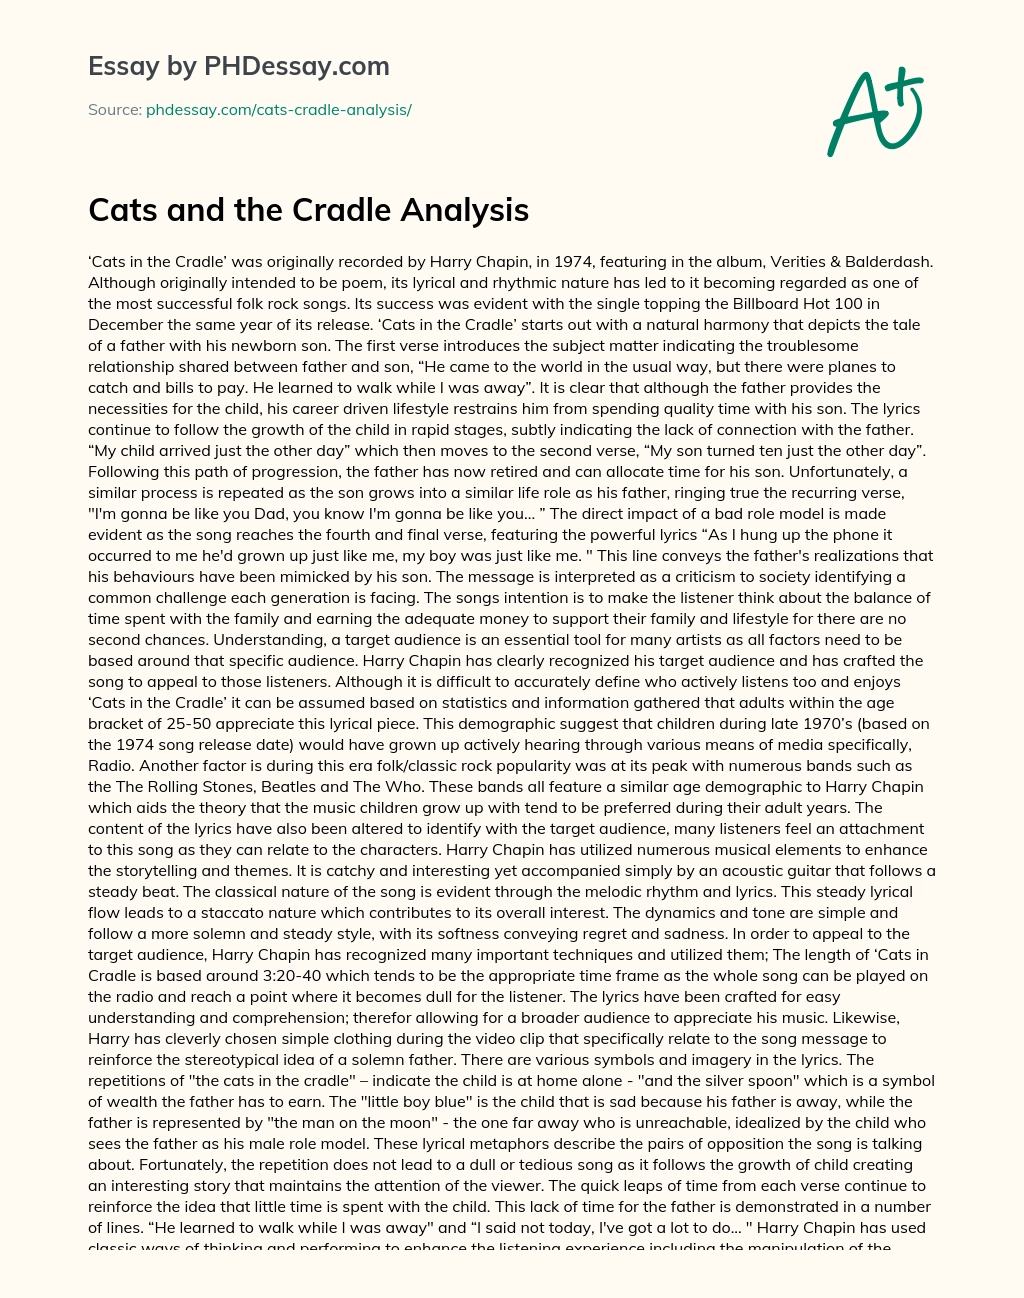 Cats and the Cradle Analysis essay